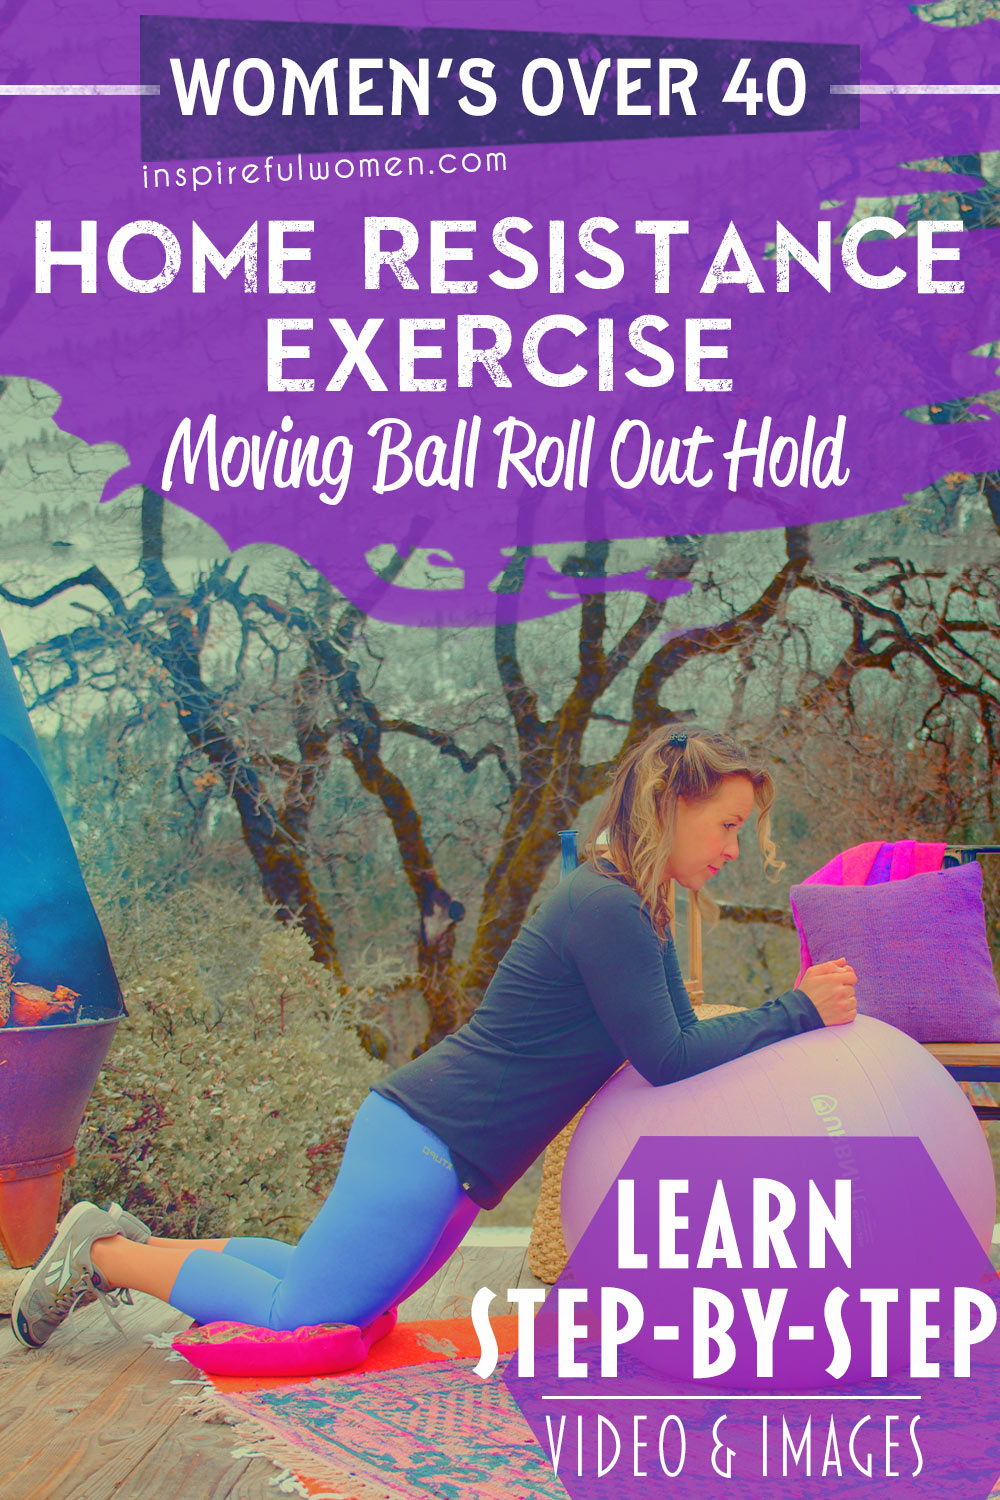 moving-ball-roll-out-hold-knee-plank-buzz-saw-stomach-core-ab-exercise-women-over-40